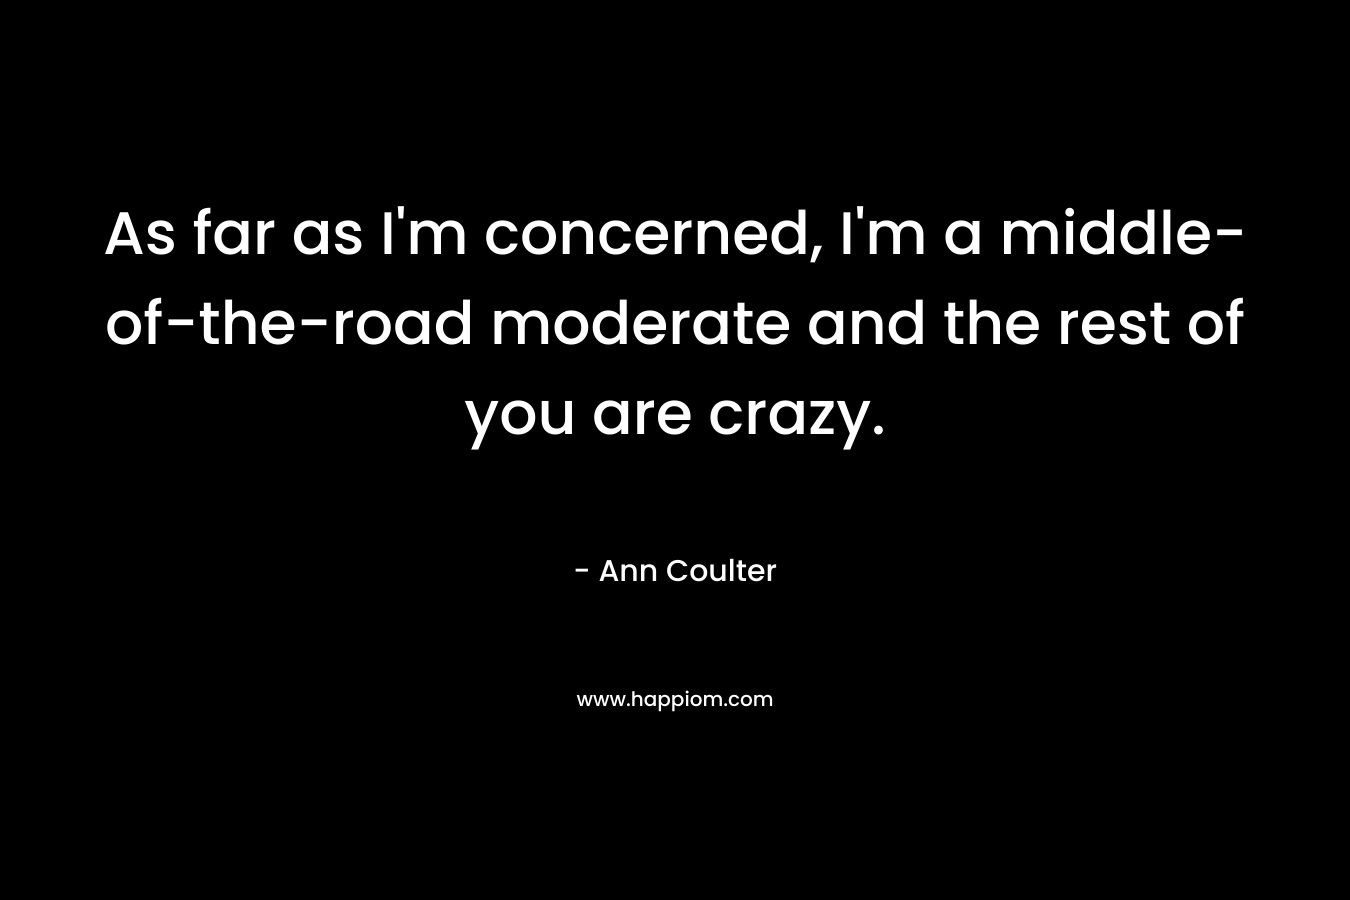 As far as I’m concerned, I’m a middle-of-the-road moderate and the rest of you are crazy. – Ann Coulter